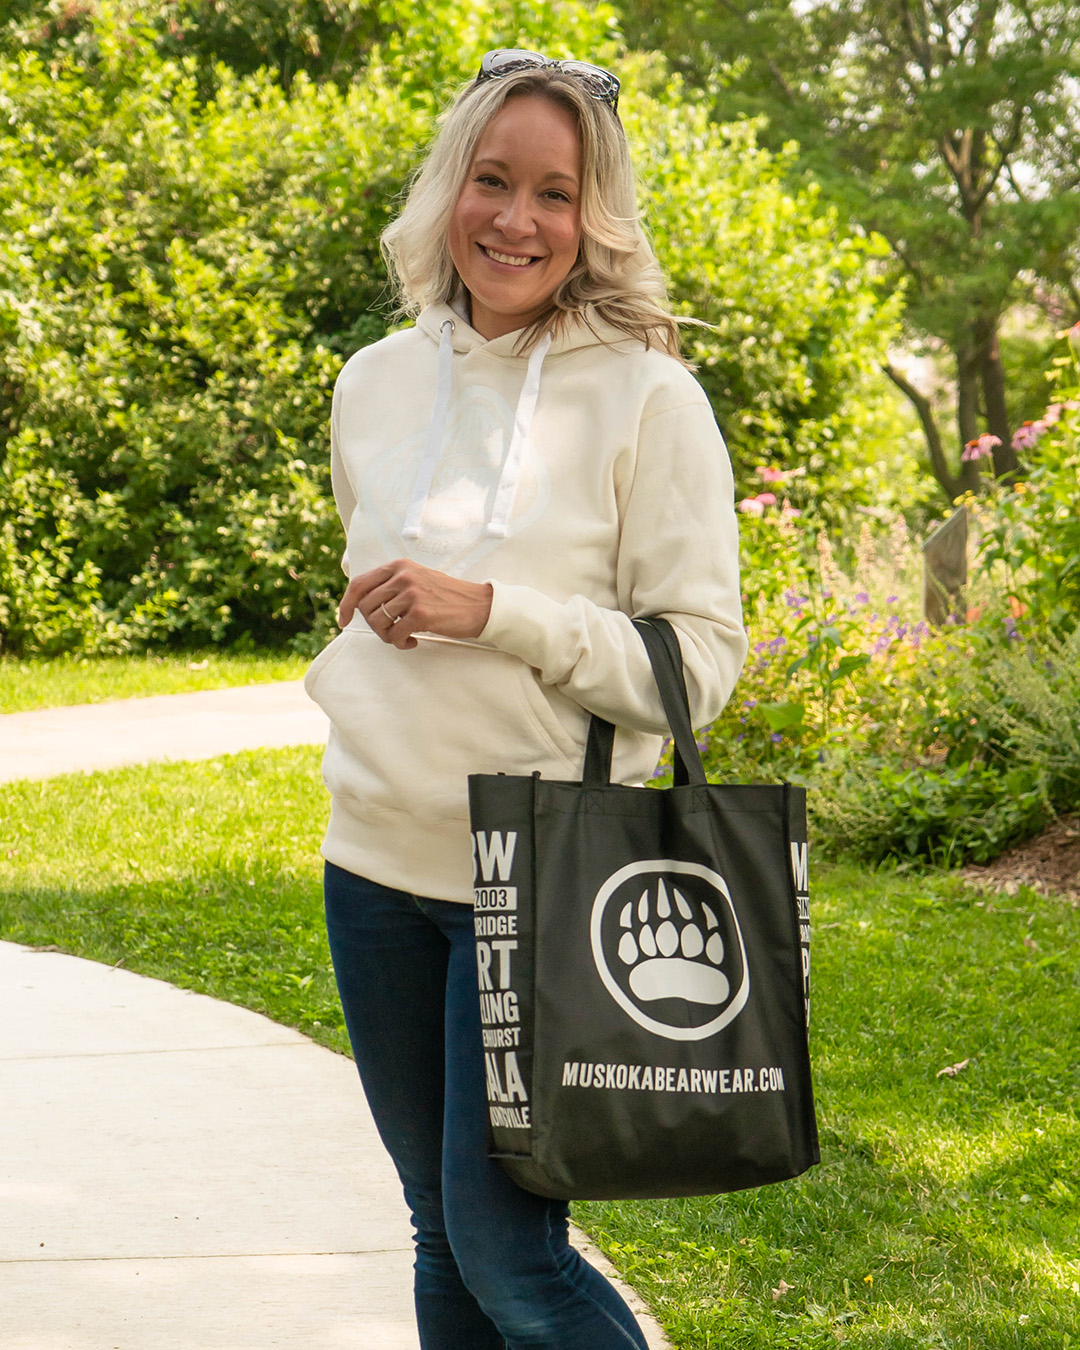 Product Shot of woman wearing a Ivory White Hoody with a white Muskoka Bear Wear logo on the frnot.